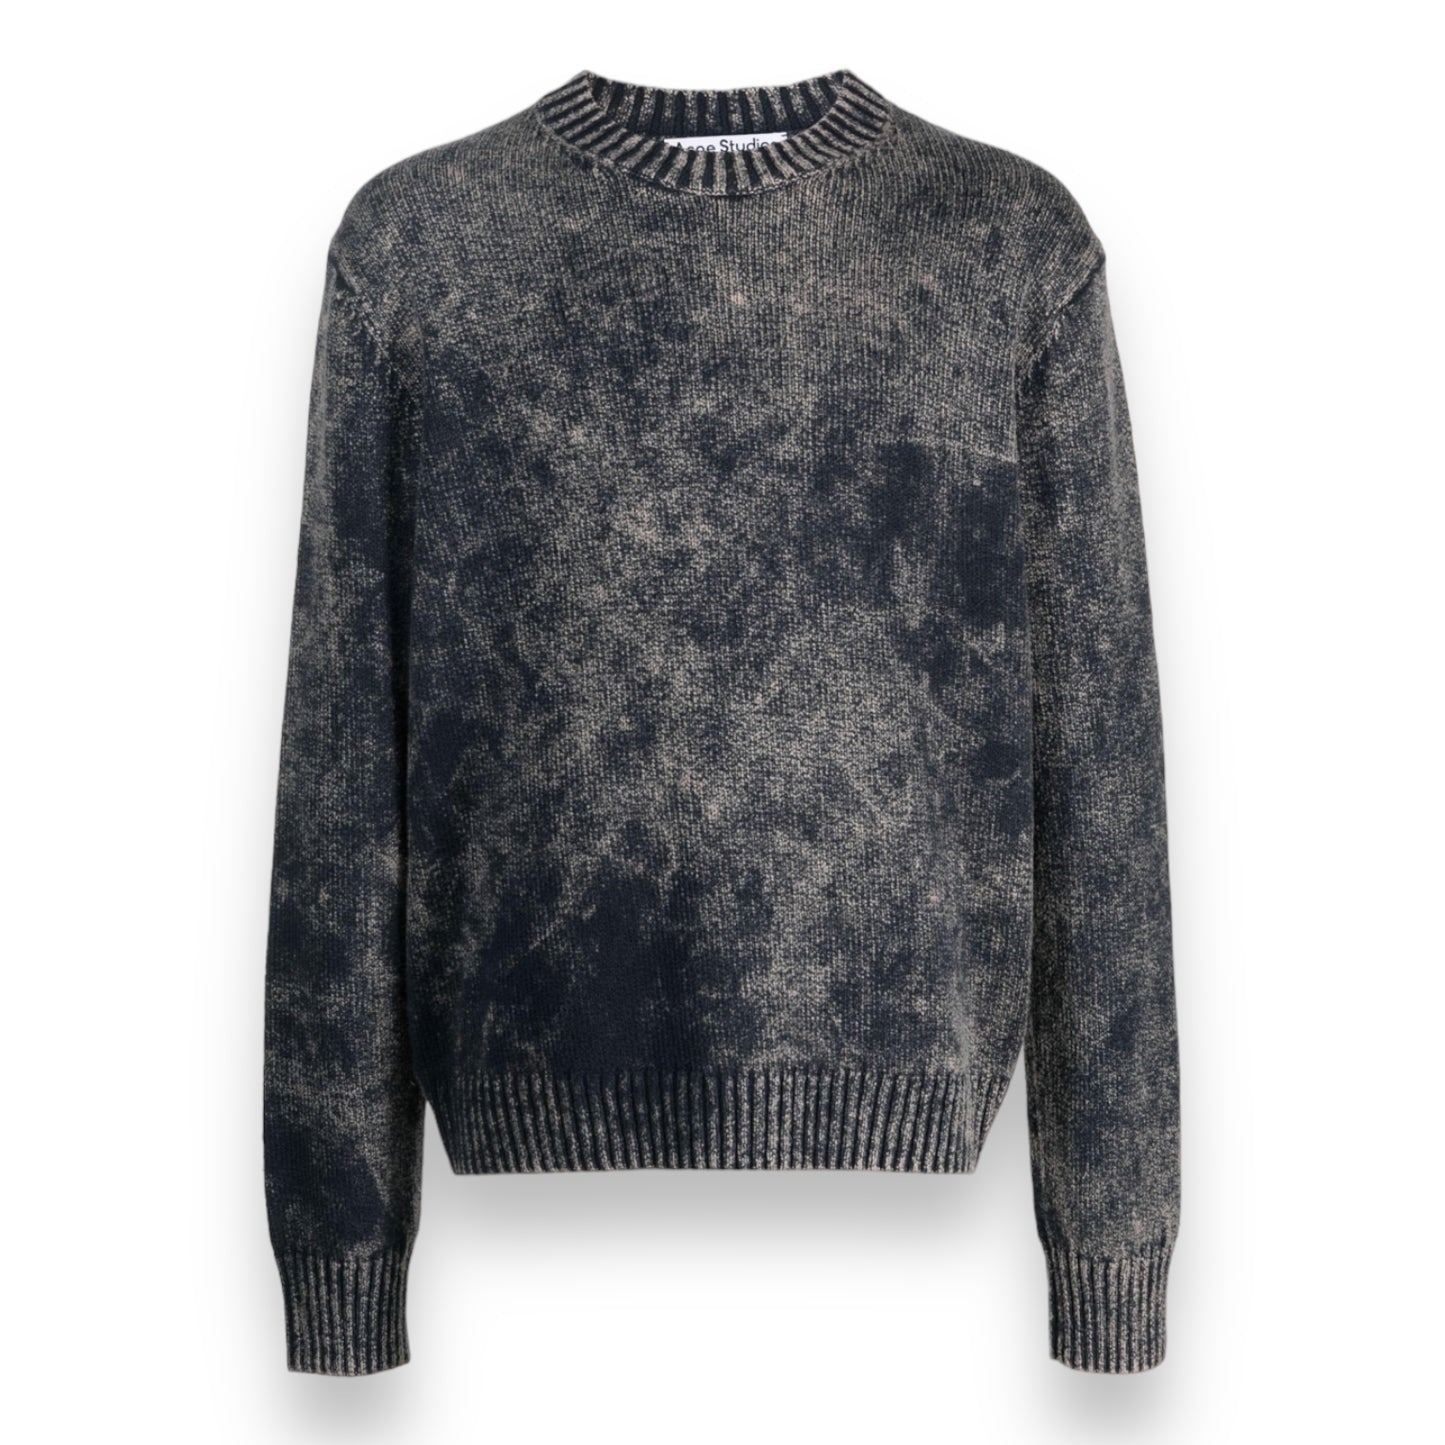 Acne Studios Knitted Sweater